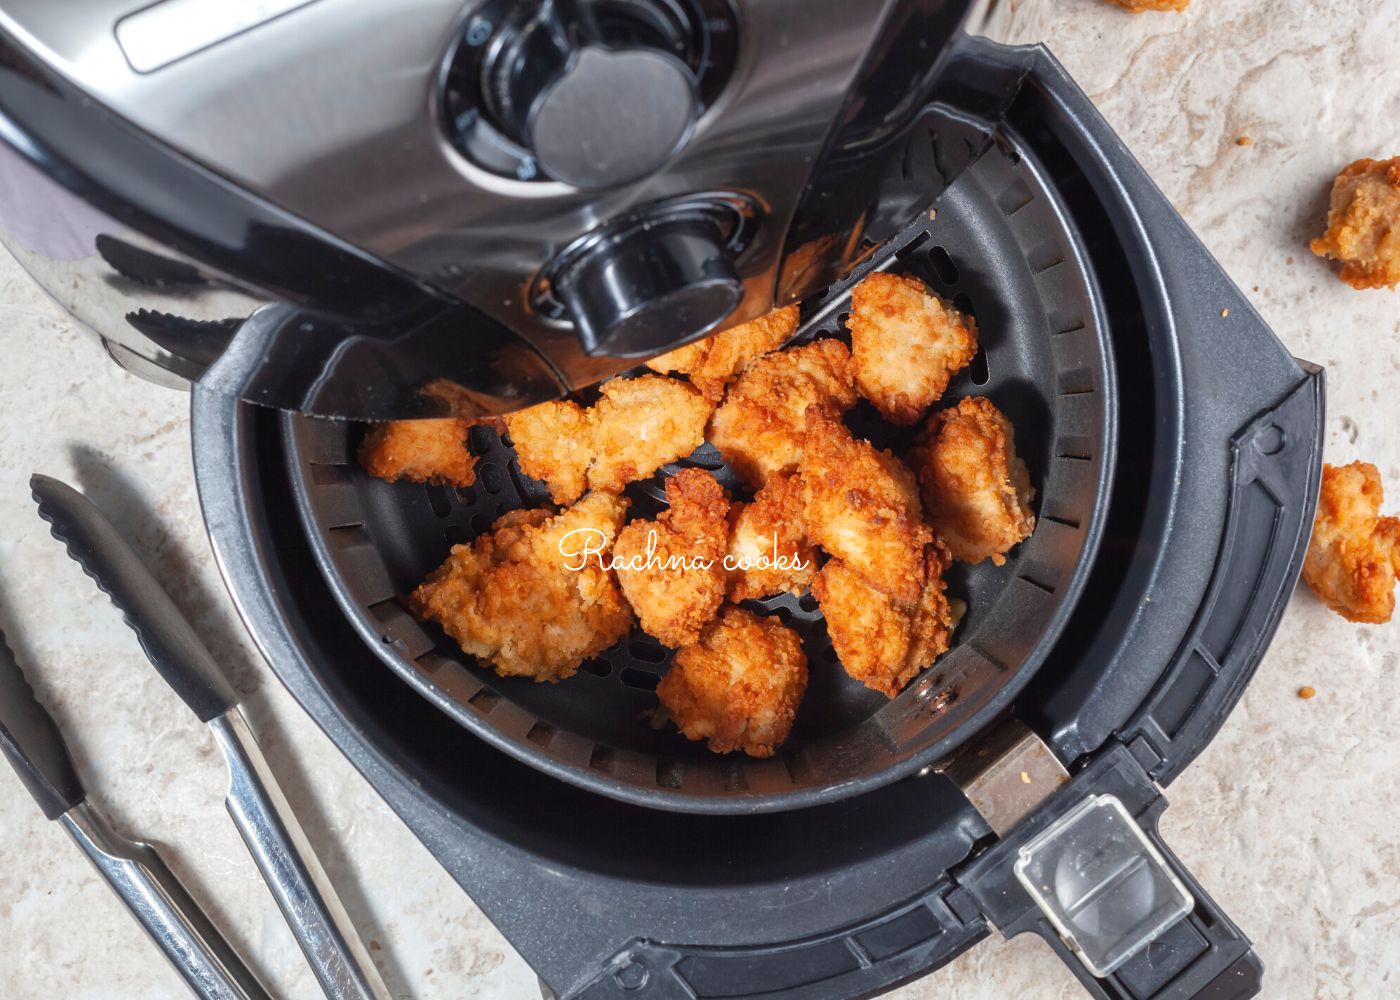 Chicken nuggets being reheated in an air fryer